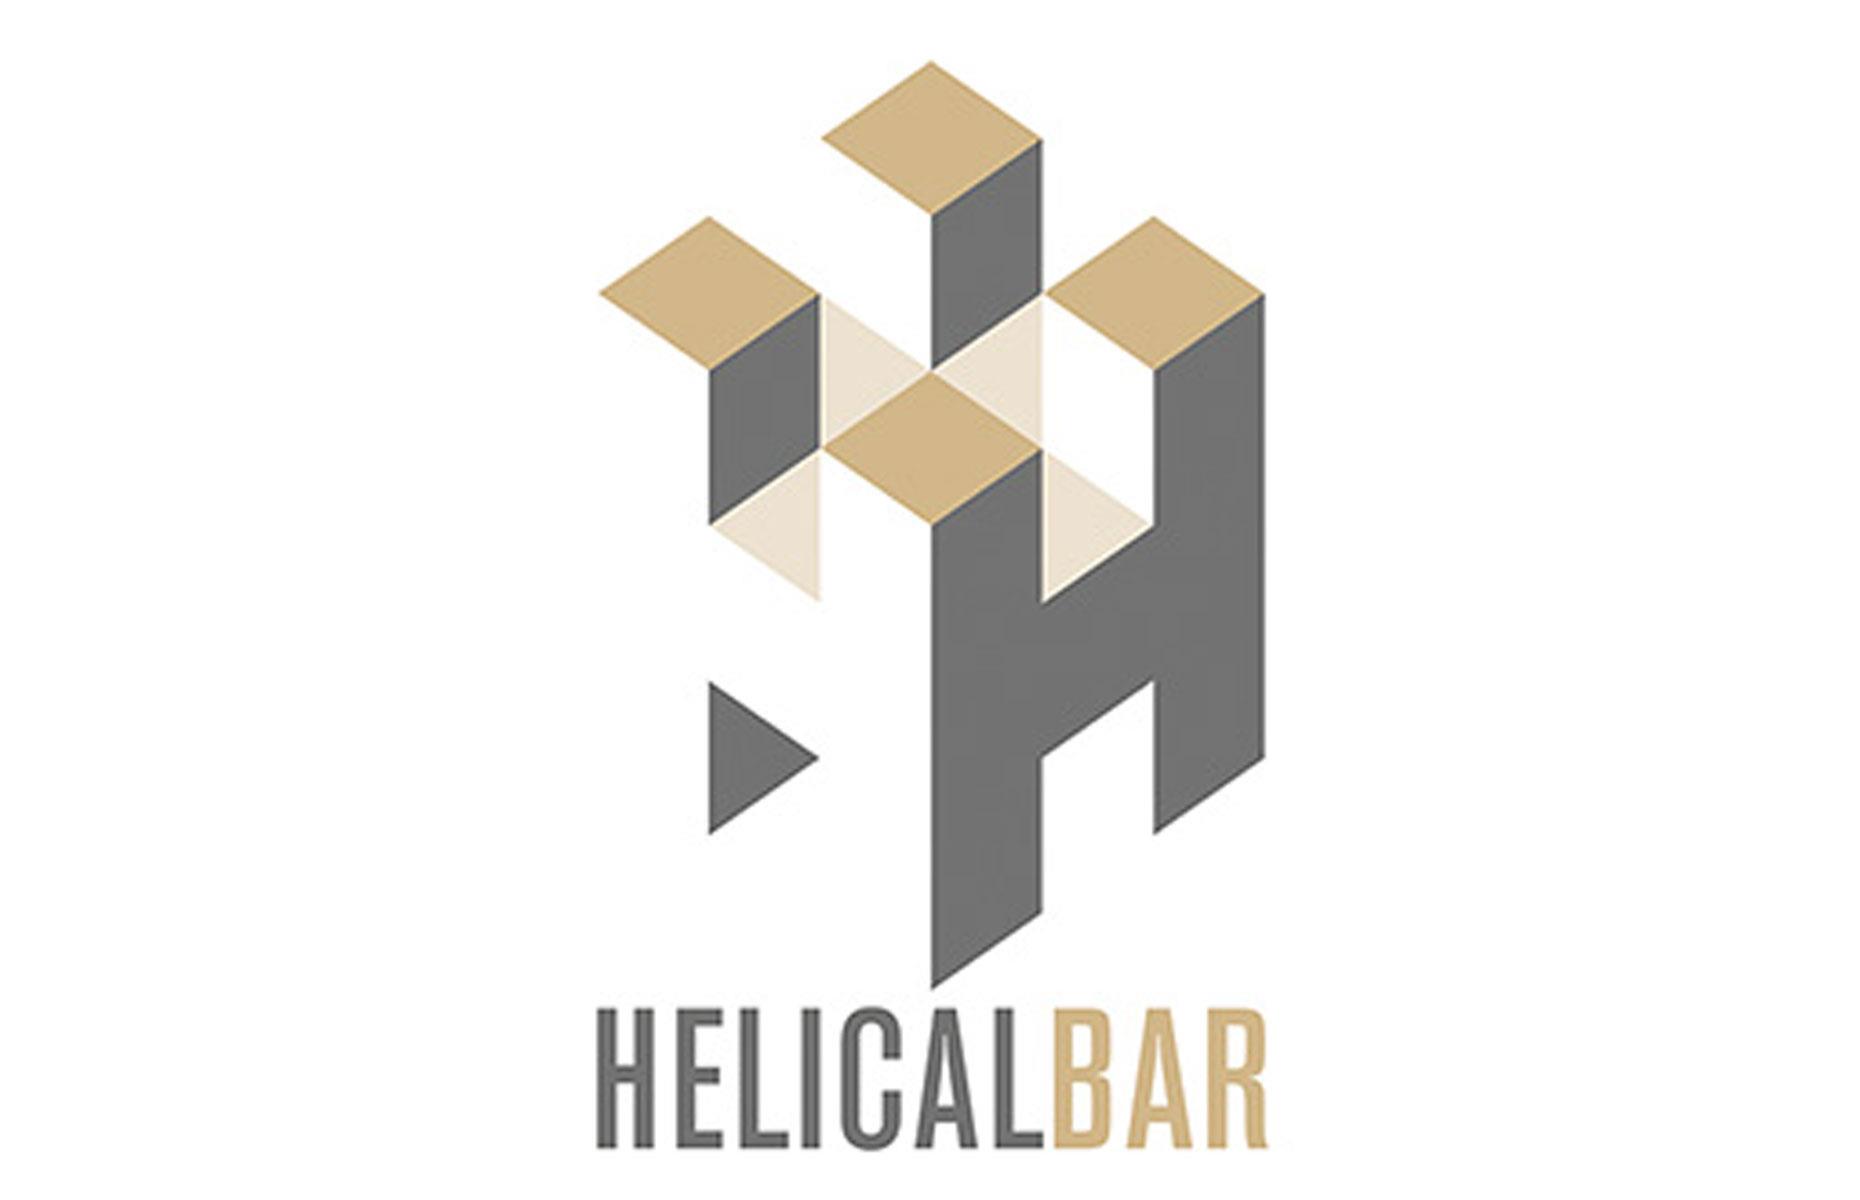 1985 – Helical Bar: $1,000 invested then is worth $723,000 (£494k) today